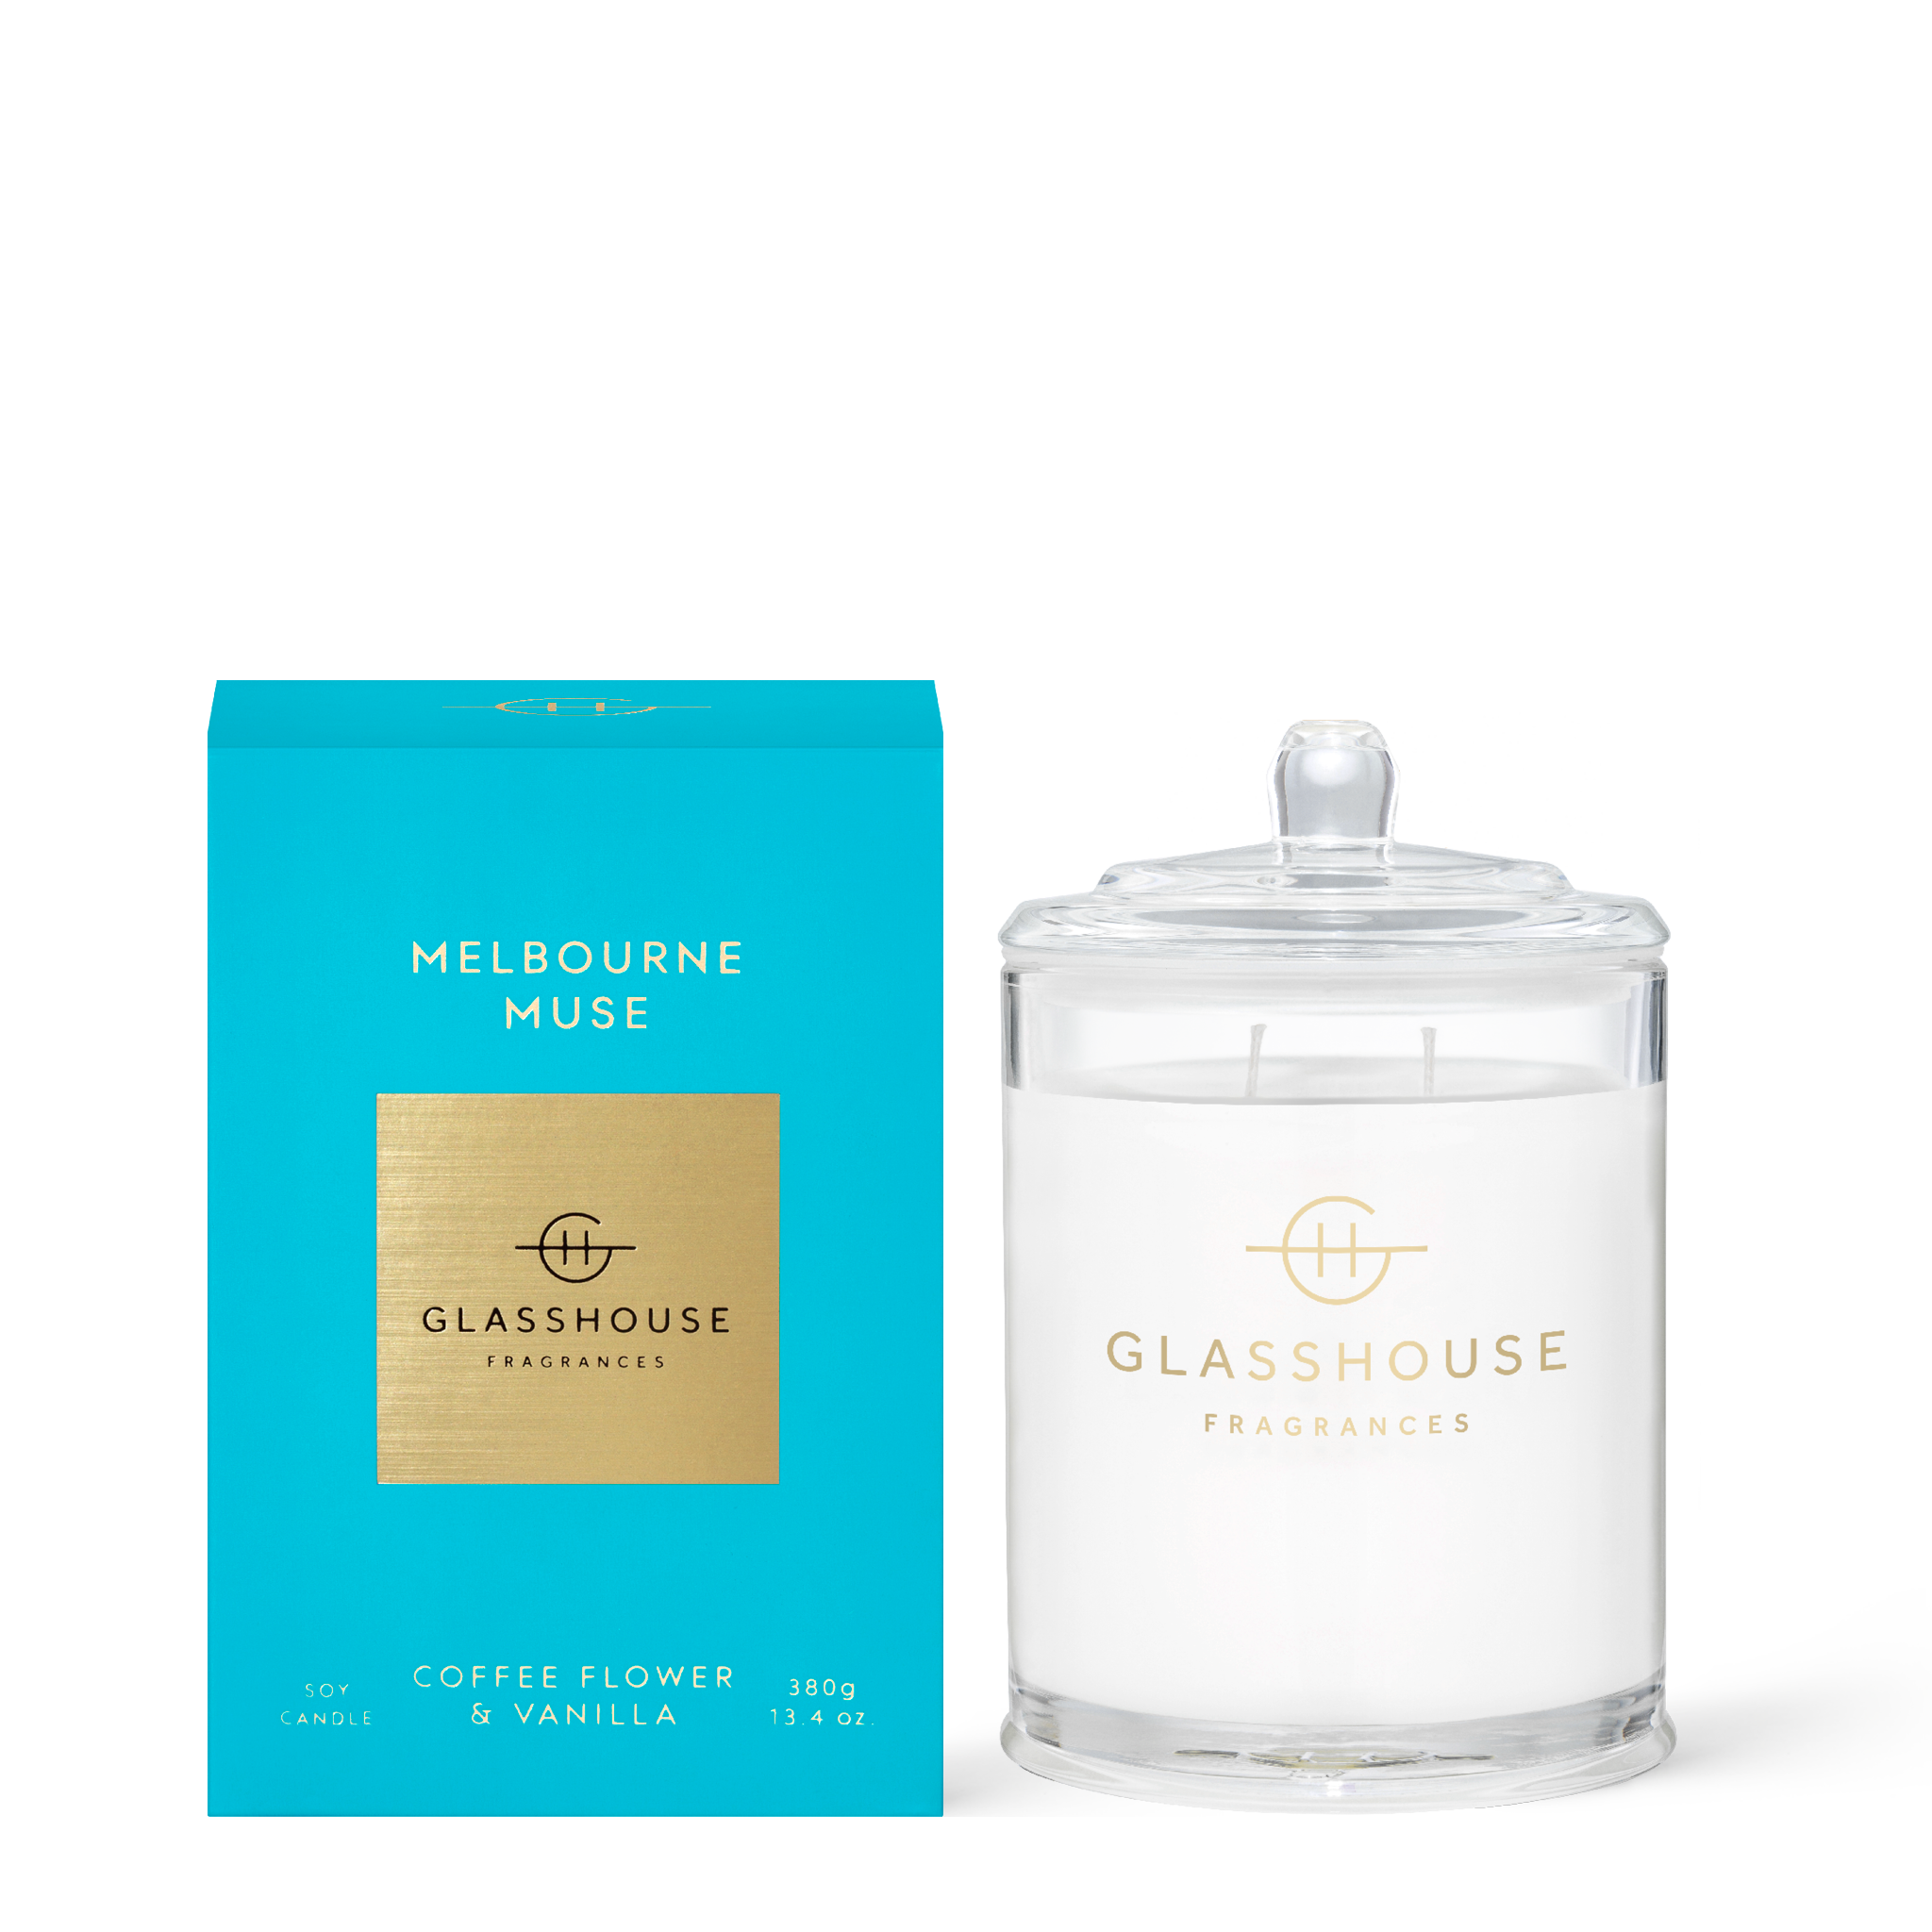 Glasshouse Fragrances Melbourne Muse Coffee Flower and Vanilla 380g Soy Candle with box